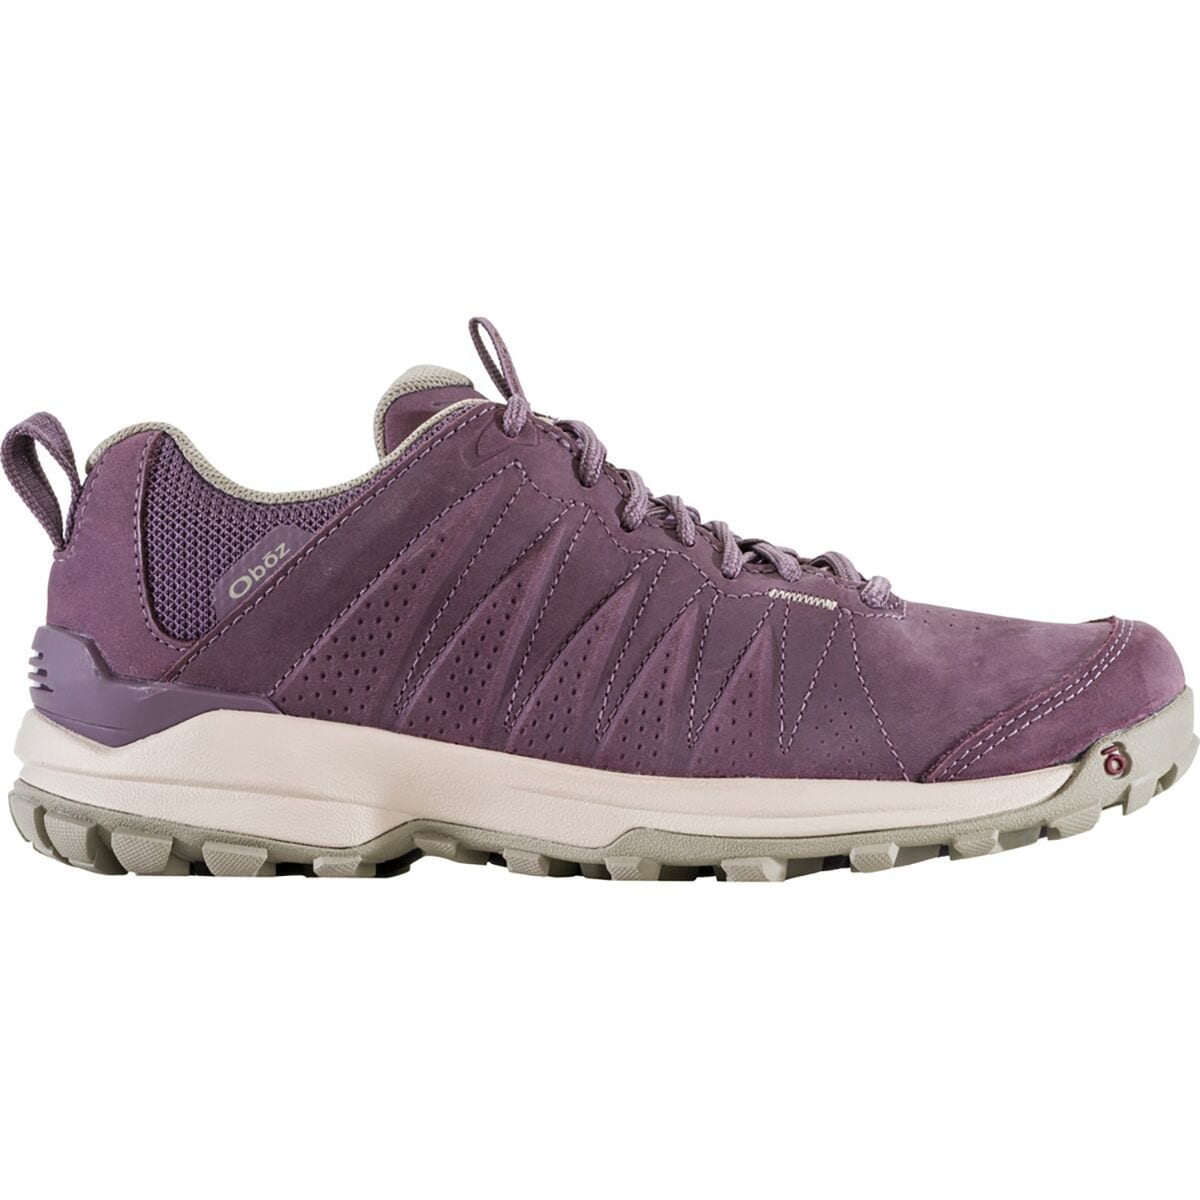 Sypes Low Leather B-DRY Hiking Shoe - Women